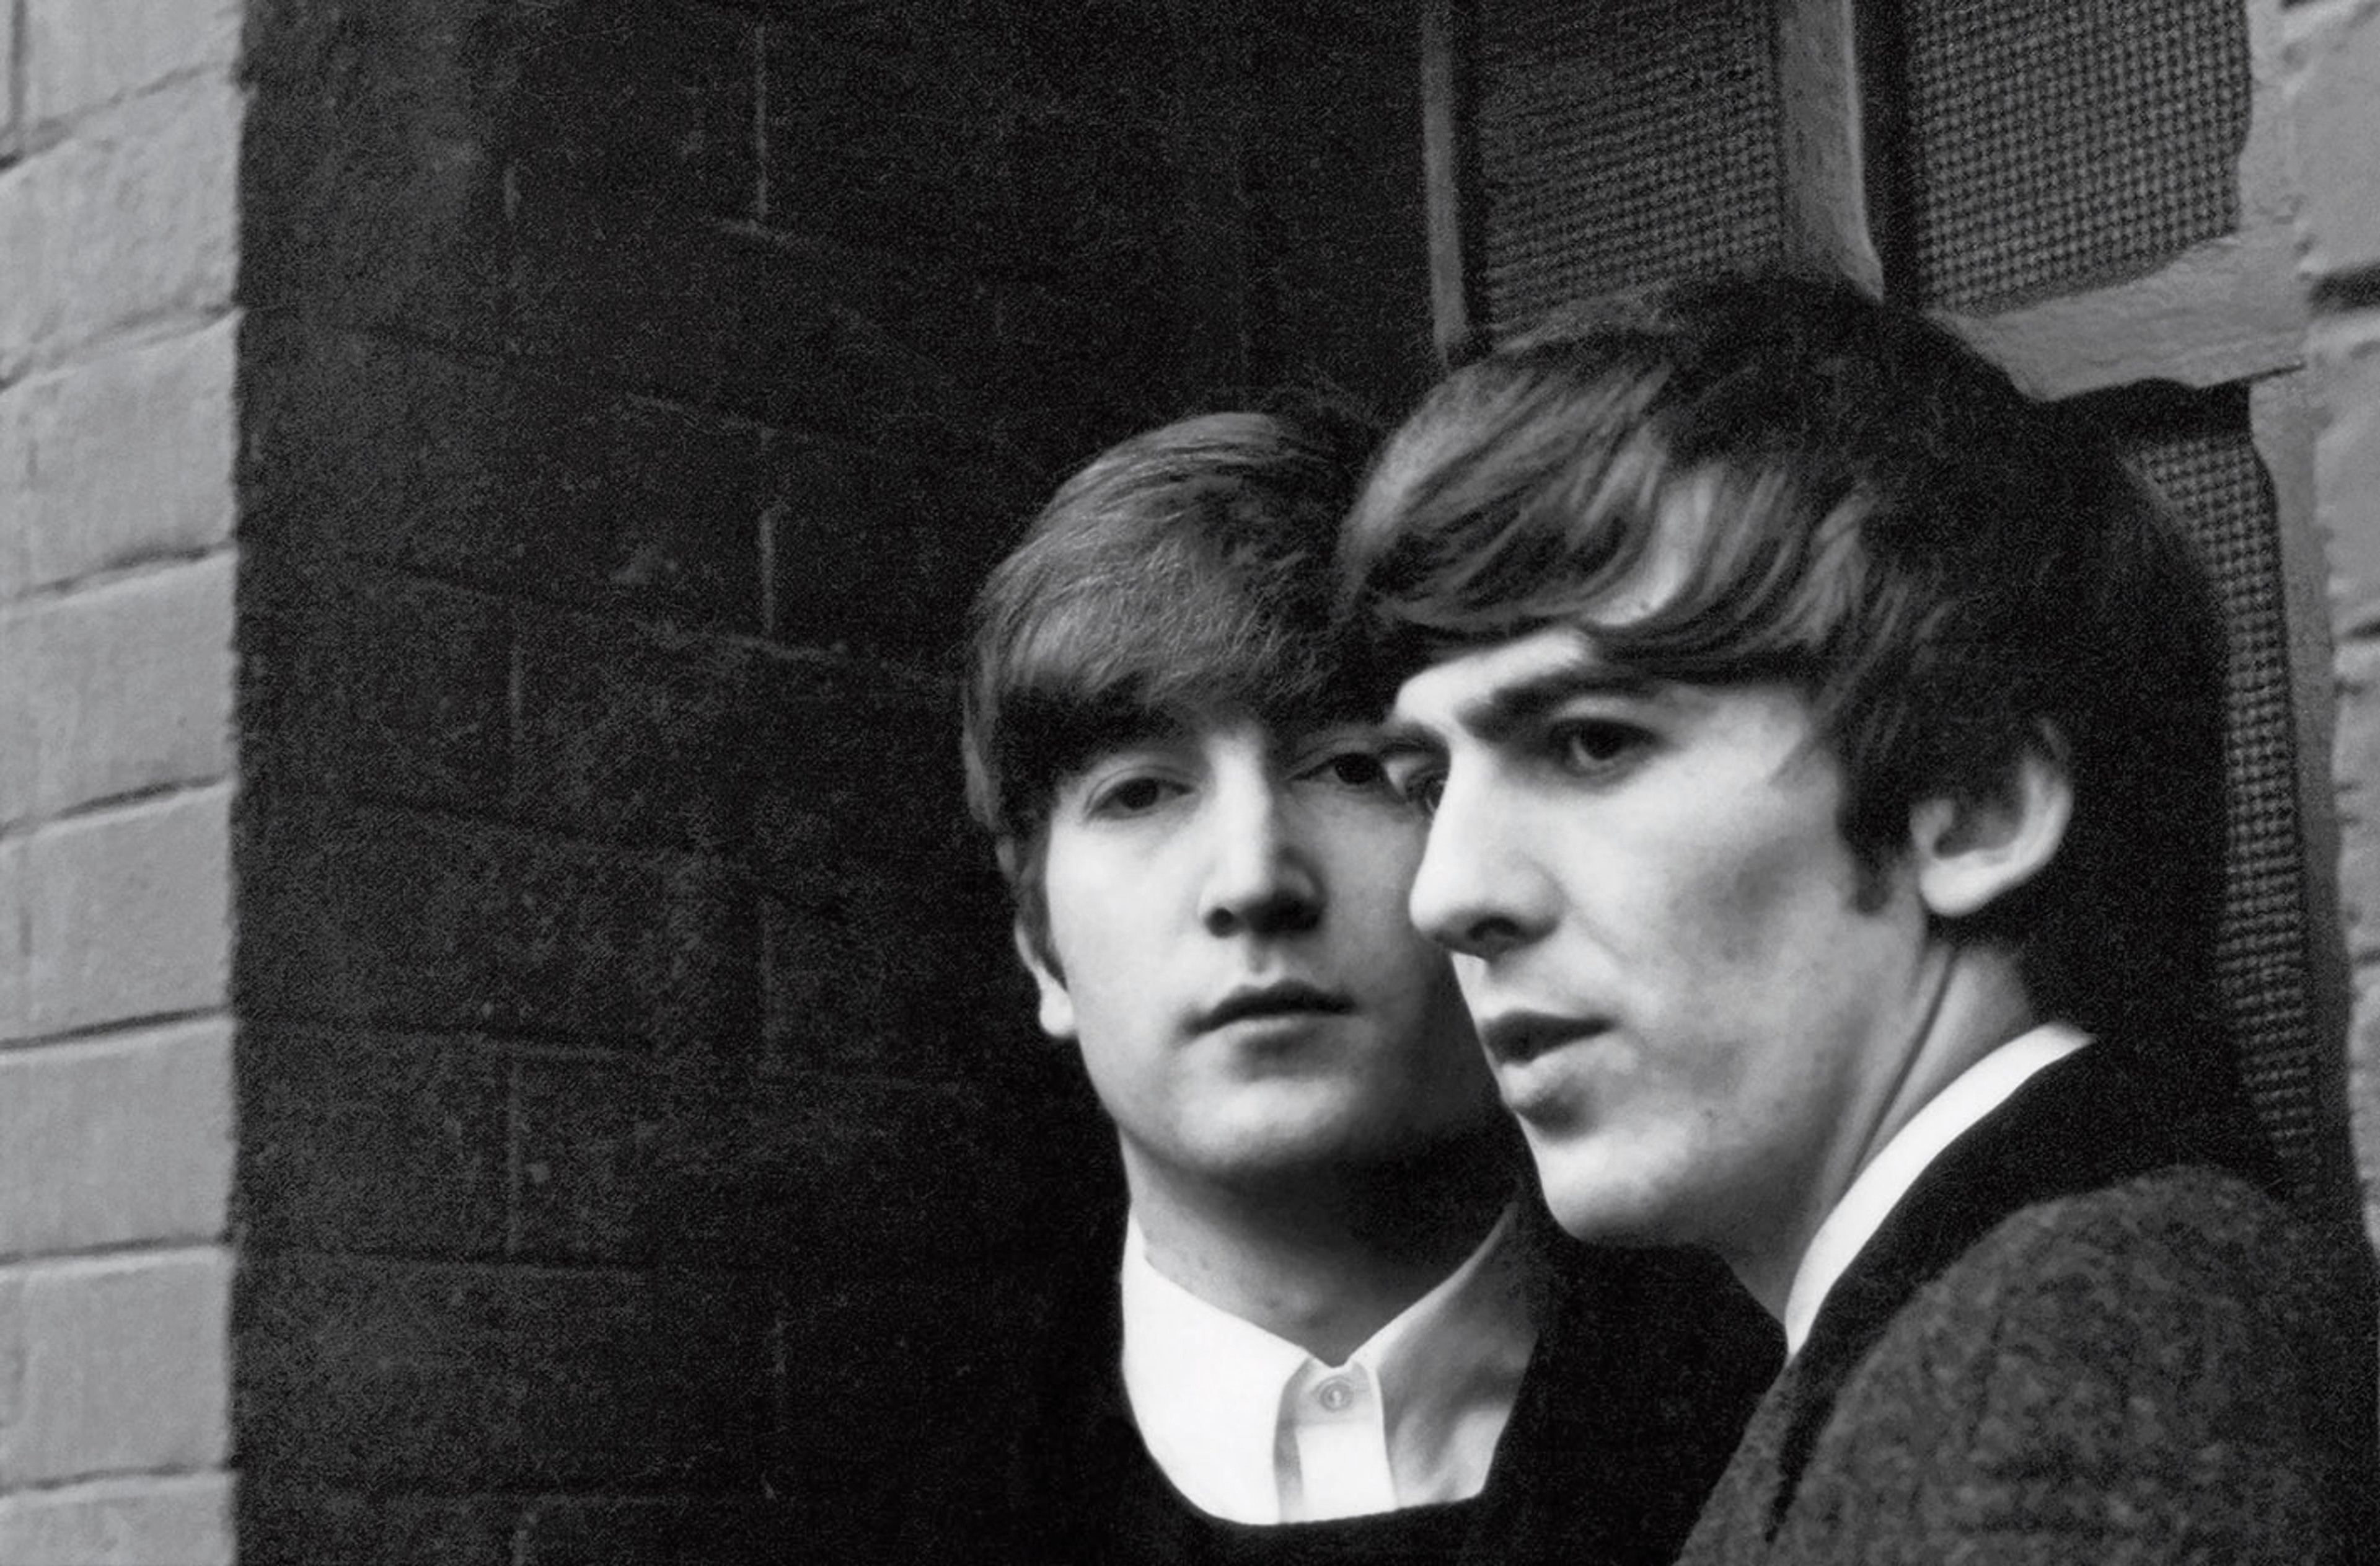 Black and white photograph of John Lennon and George Harrison taken by Paul McCartney